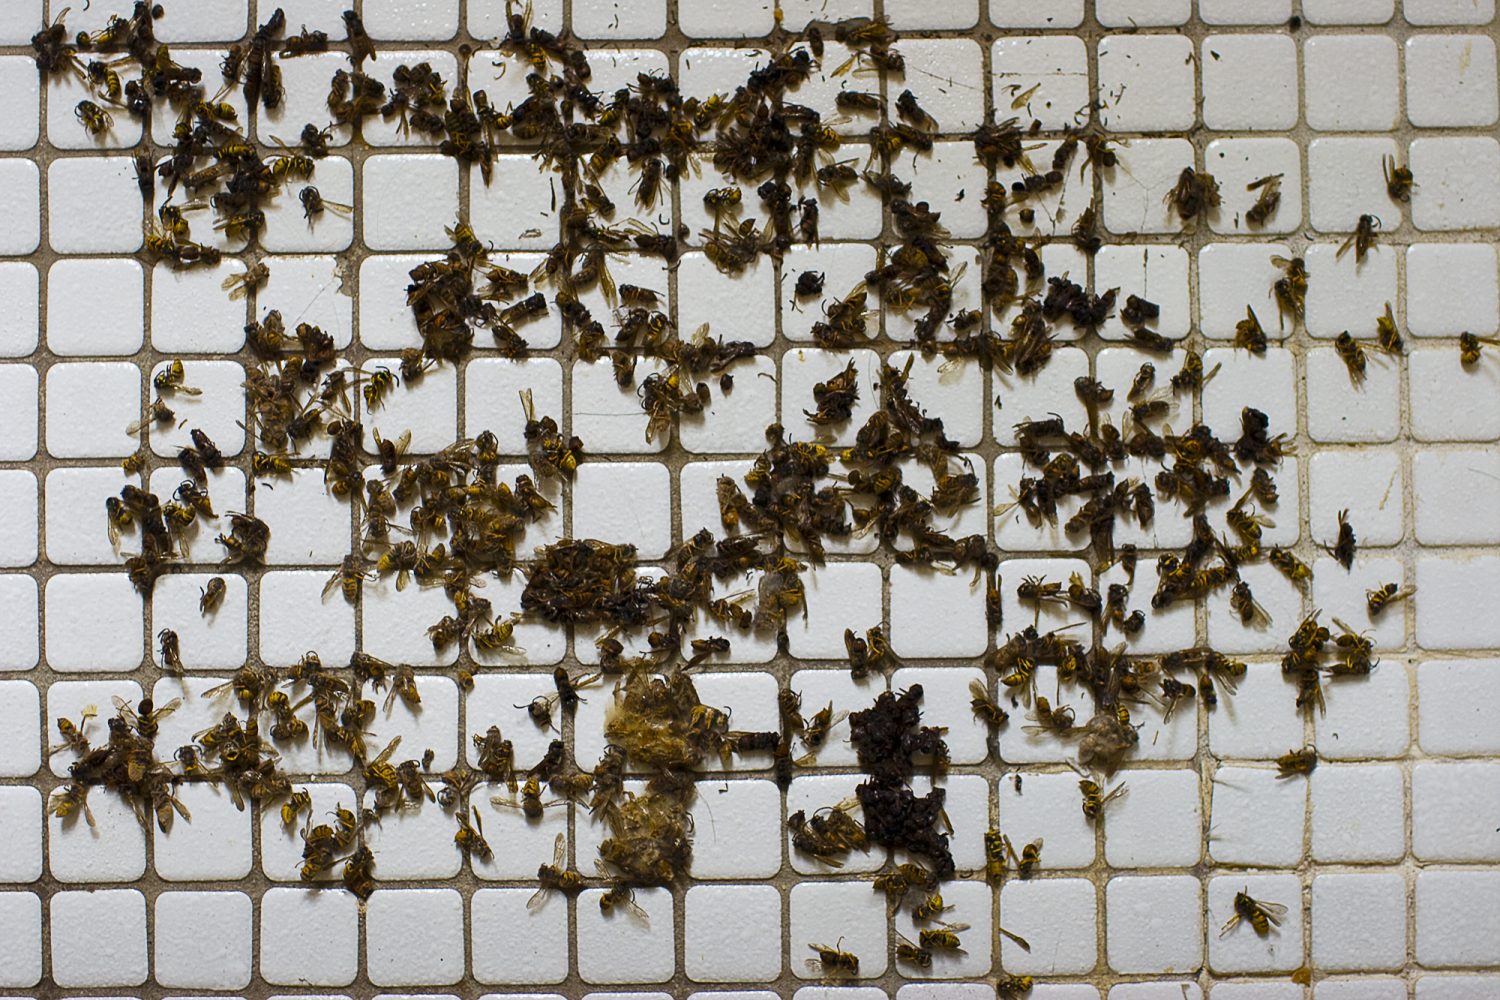 Bunch of Dead Wasps Collected and Gridded on Tile Floor